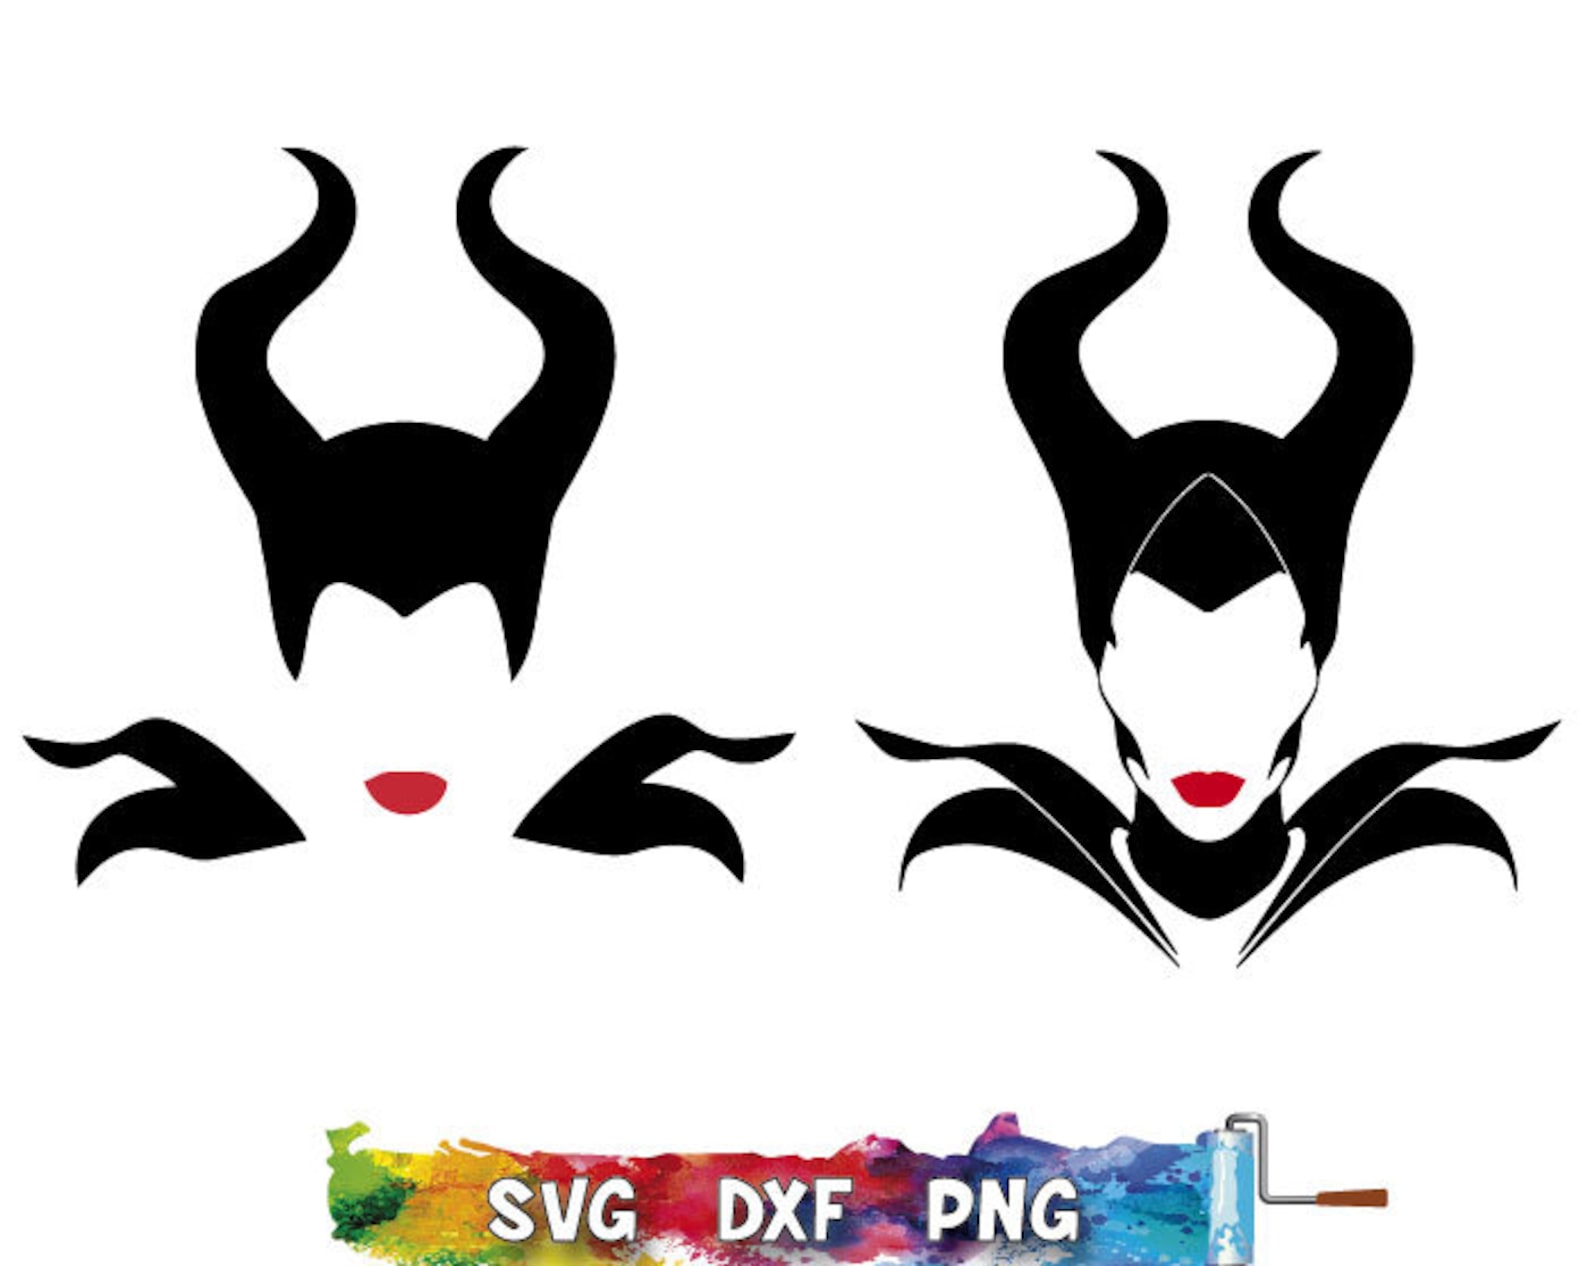 Maleficent svg Maleficent Maleficent cut file File | Etsy